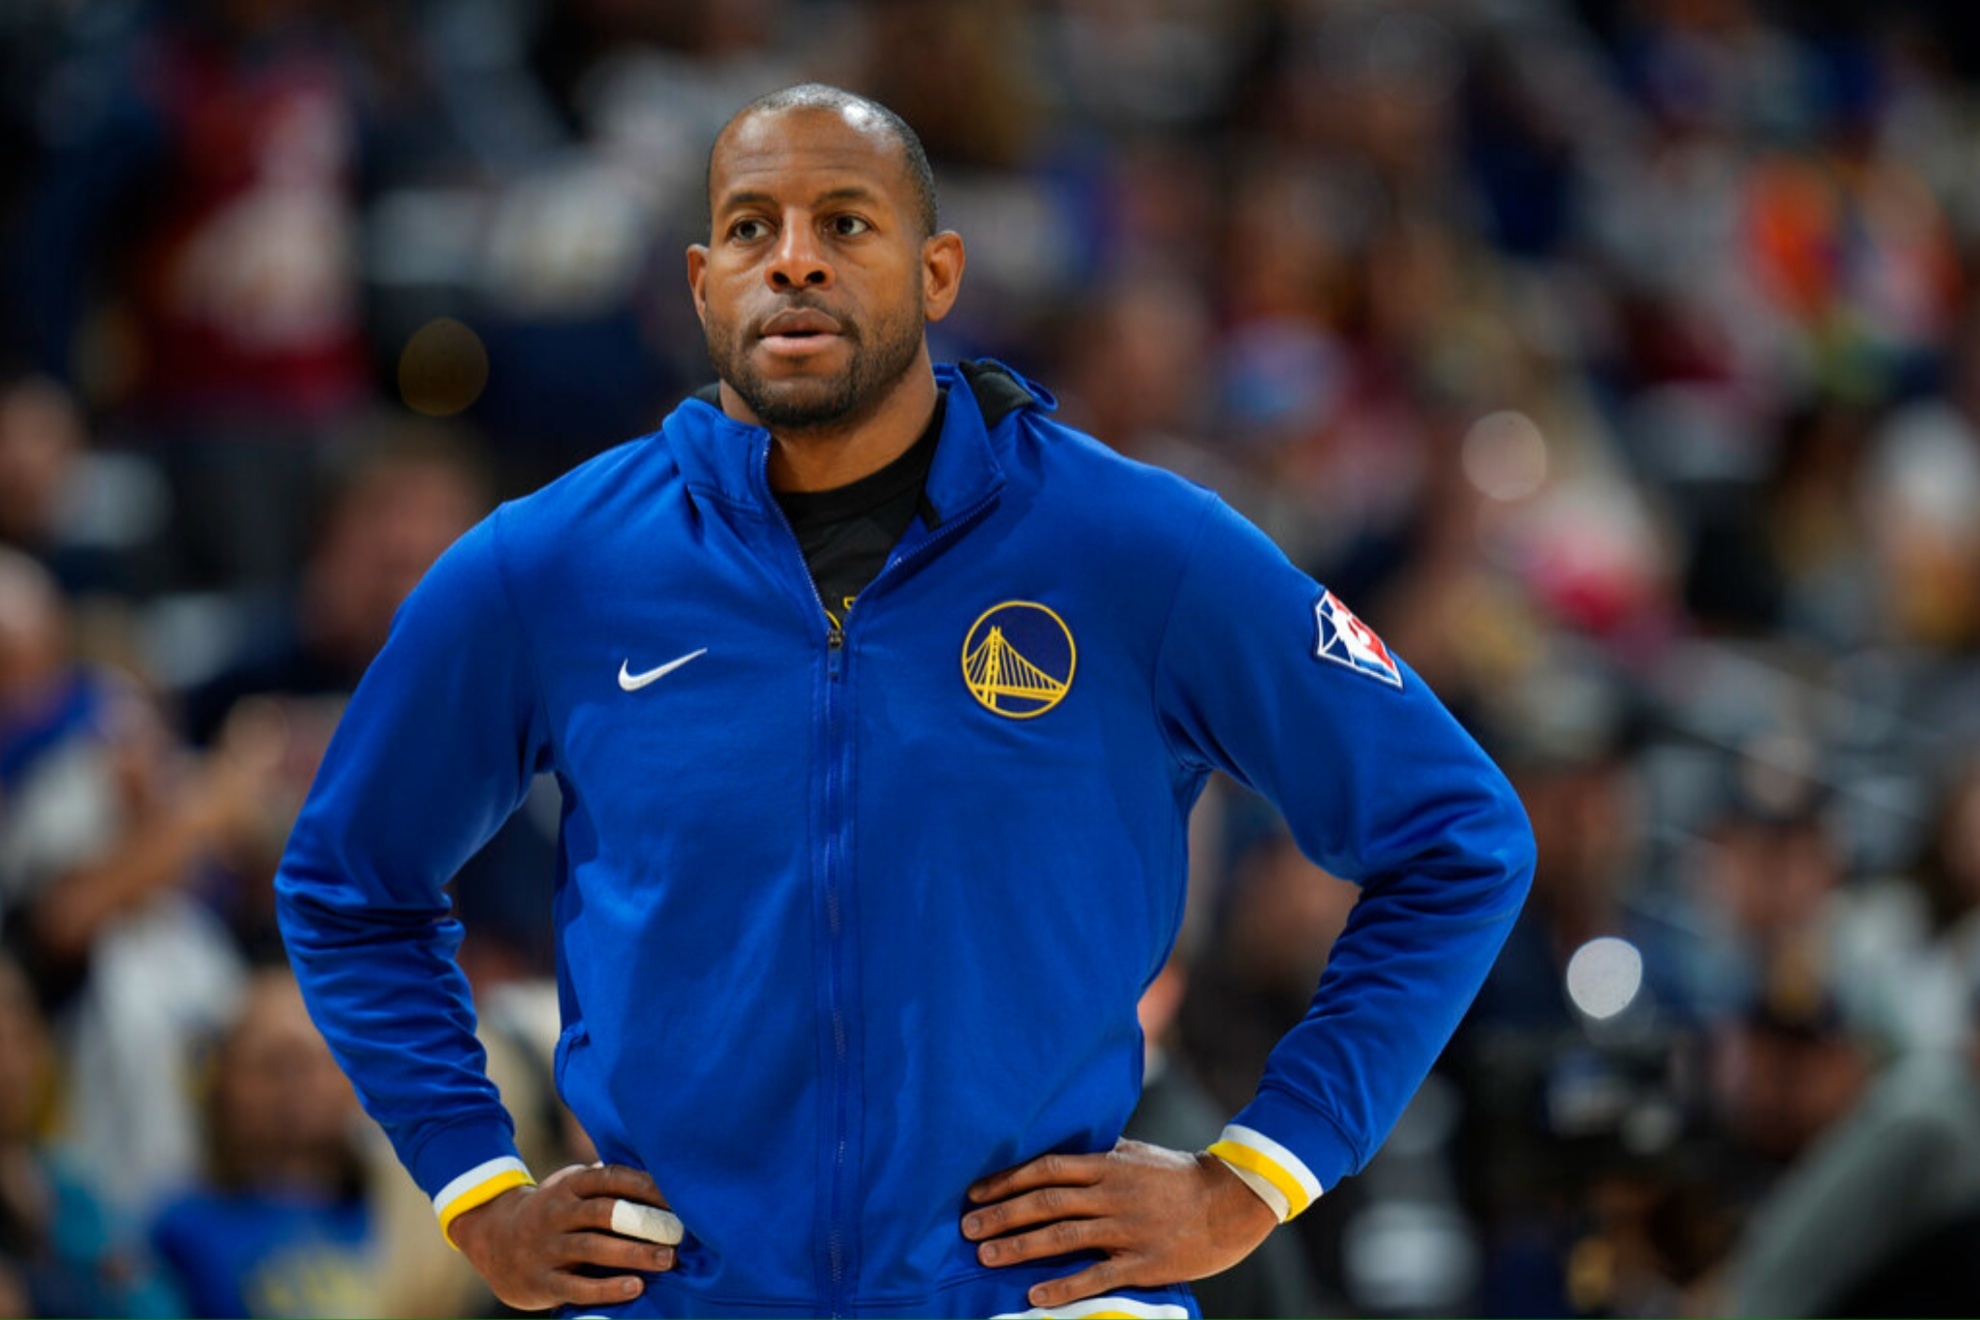 Andre Iguodala with Golden State in the 2022 playoffs.